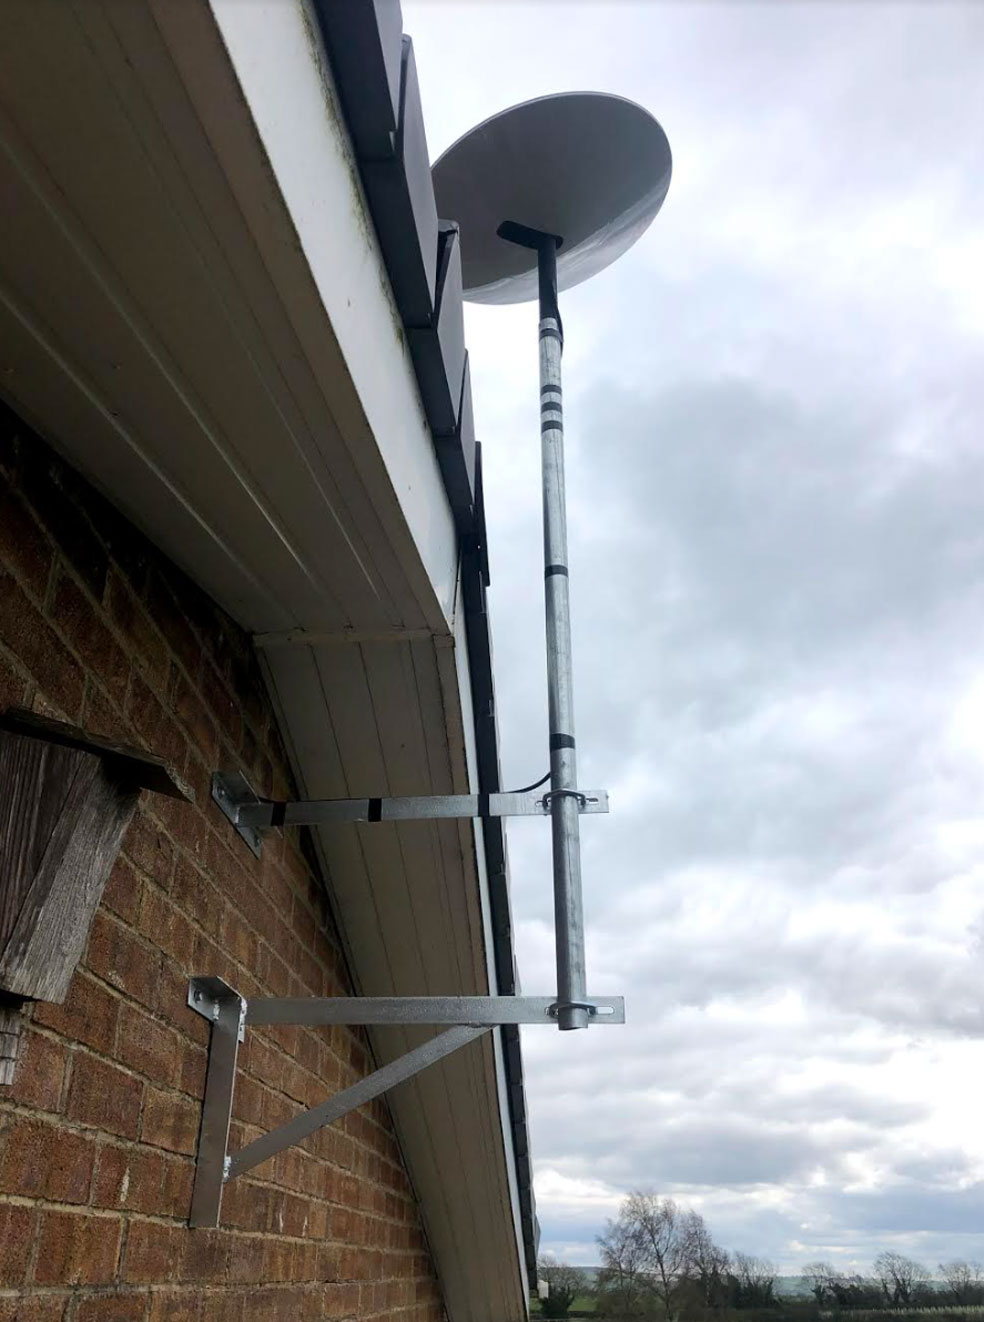 Professional satellite installation in Warrington using our own manufactured parts.